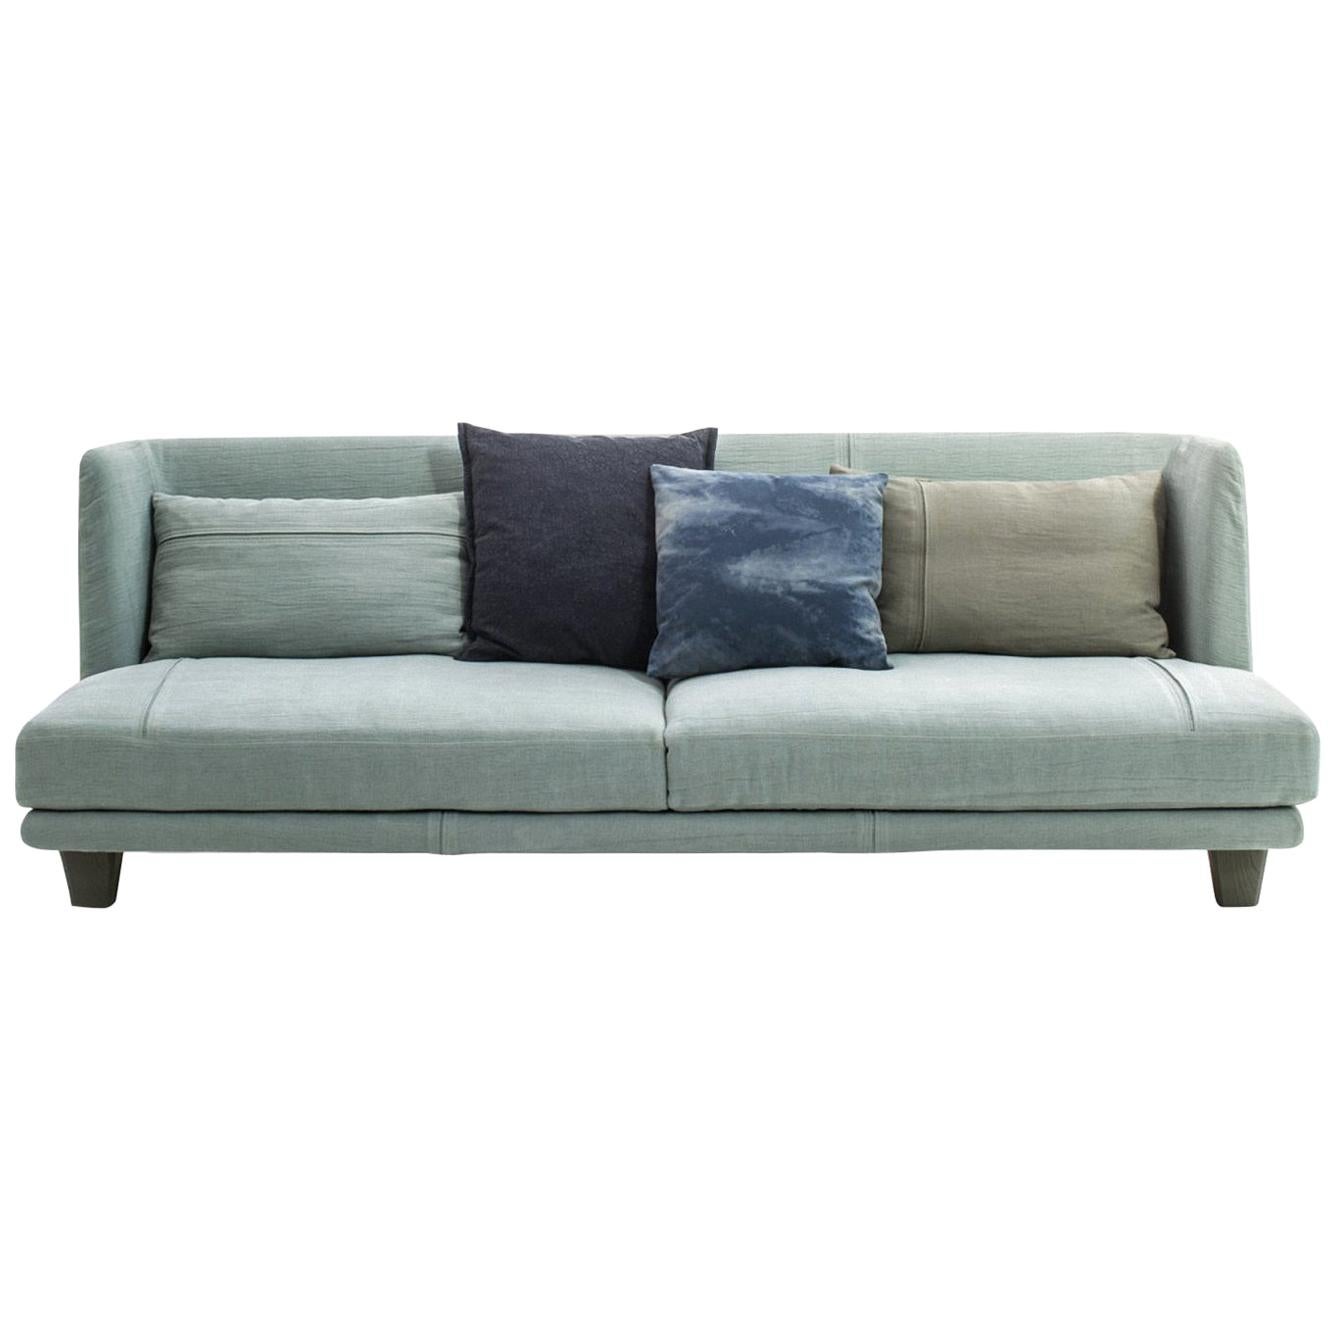 "Gimme More" Three-Seat Fabric Sofa with Fiber or Goose by Moroso for Diesel